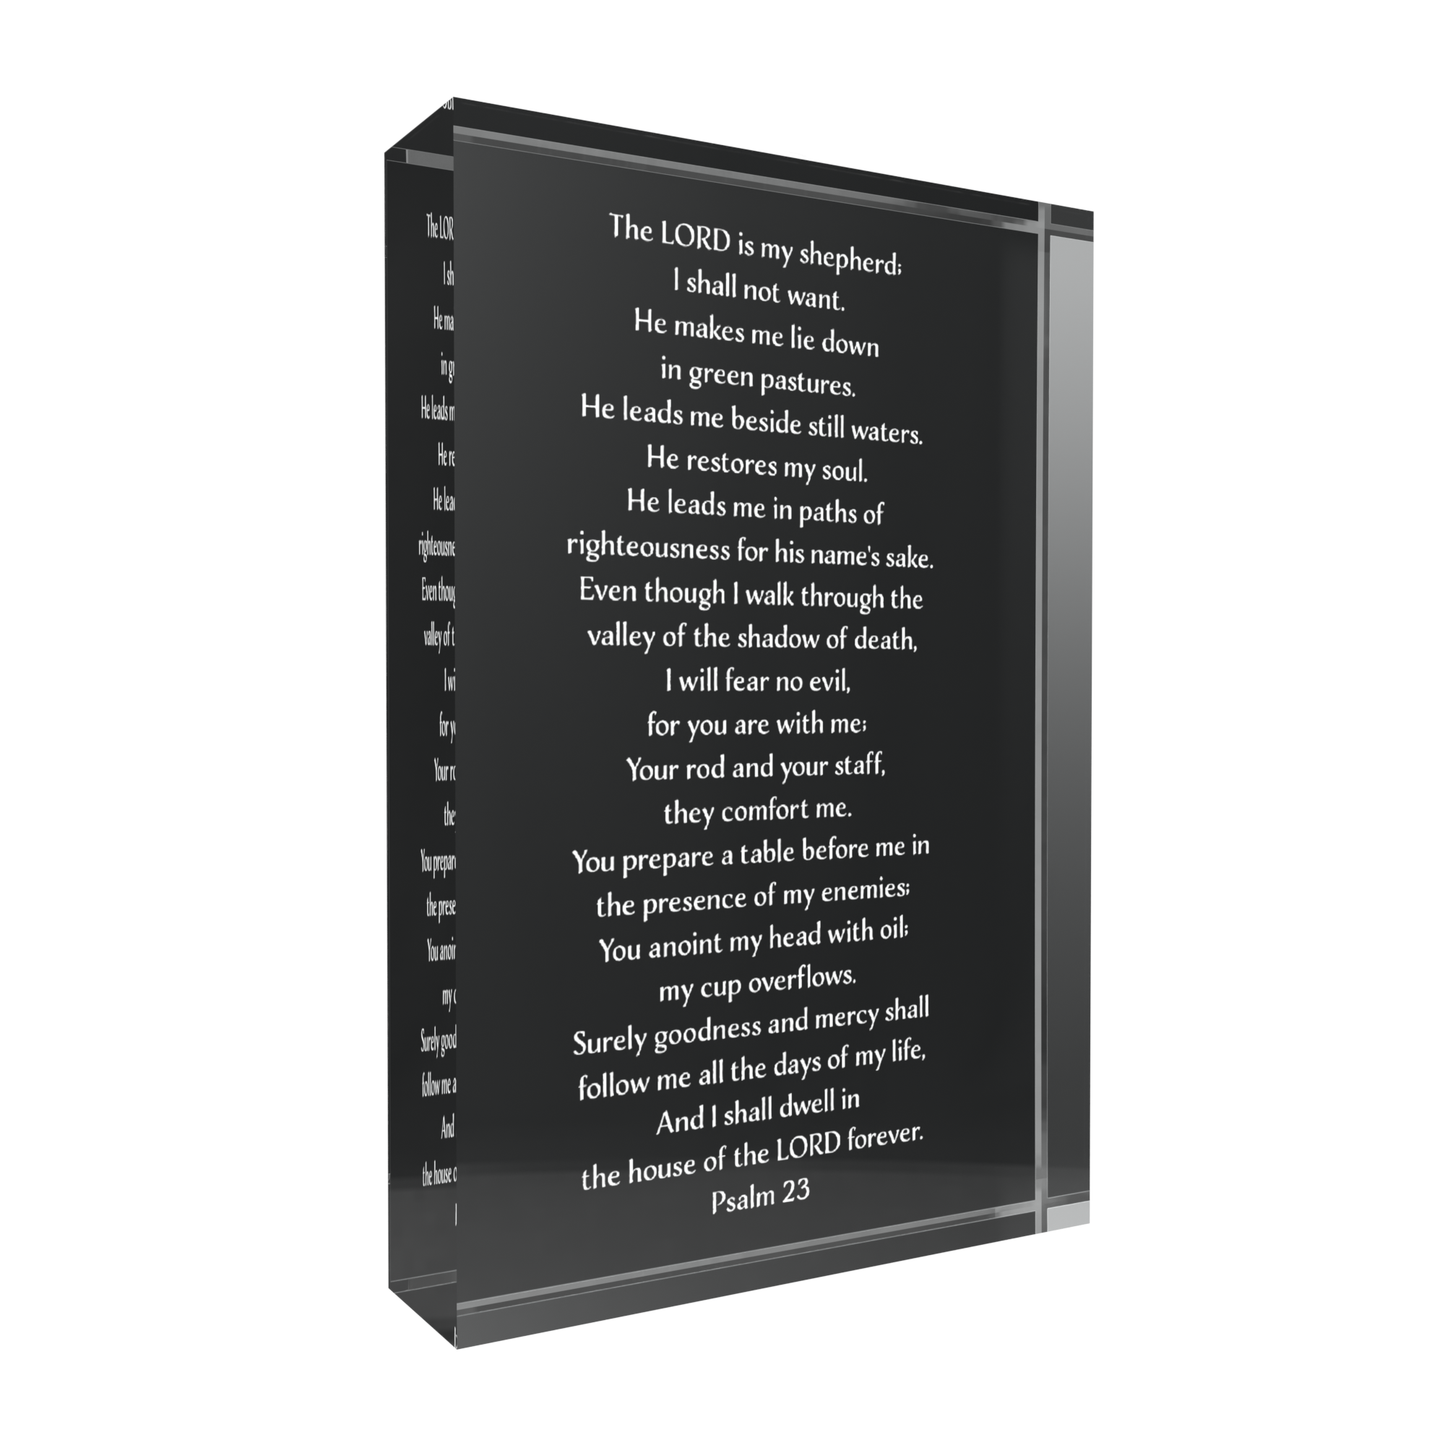 The 23rd Psalm Lucite Plaque. Comforting and Reassuring.